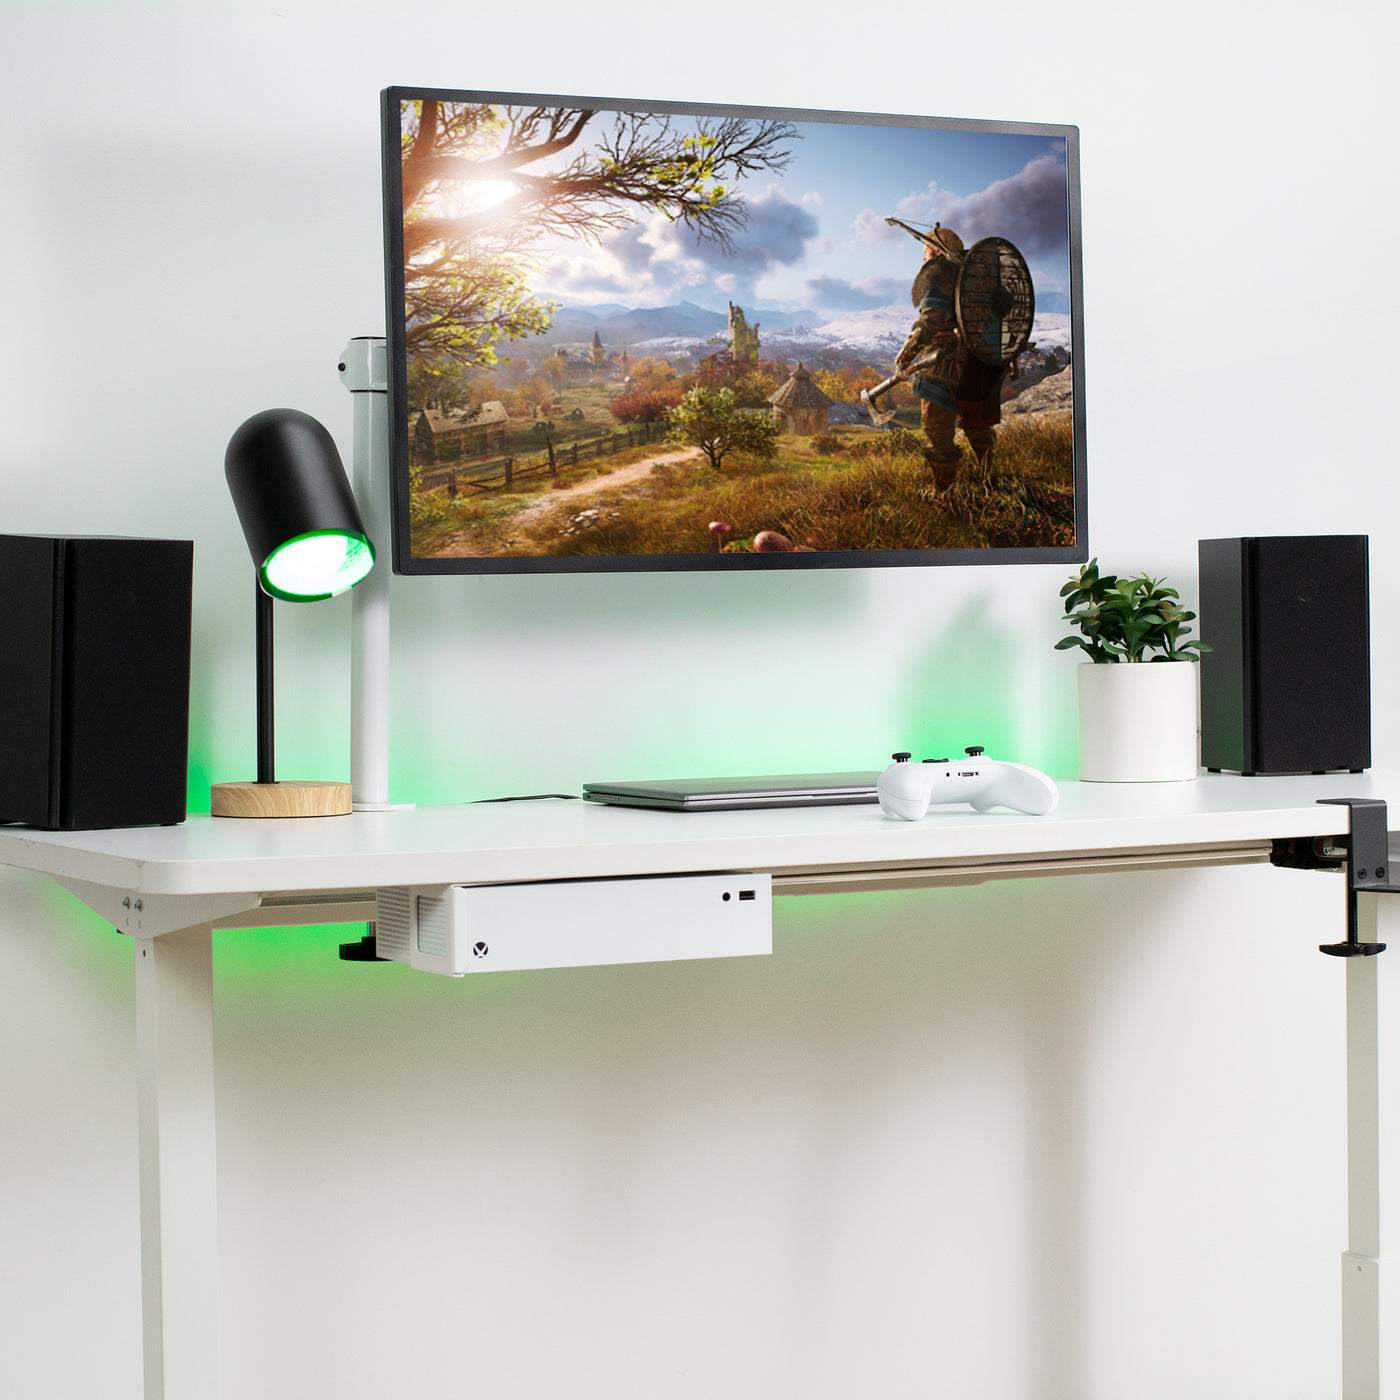 Modern Gaming setup on a sit-to-stand desk from VIVO.